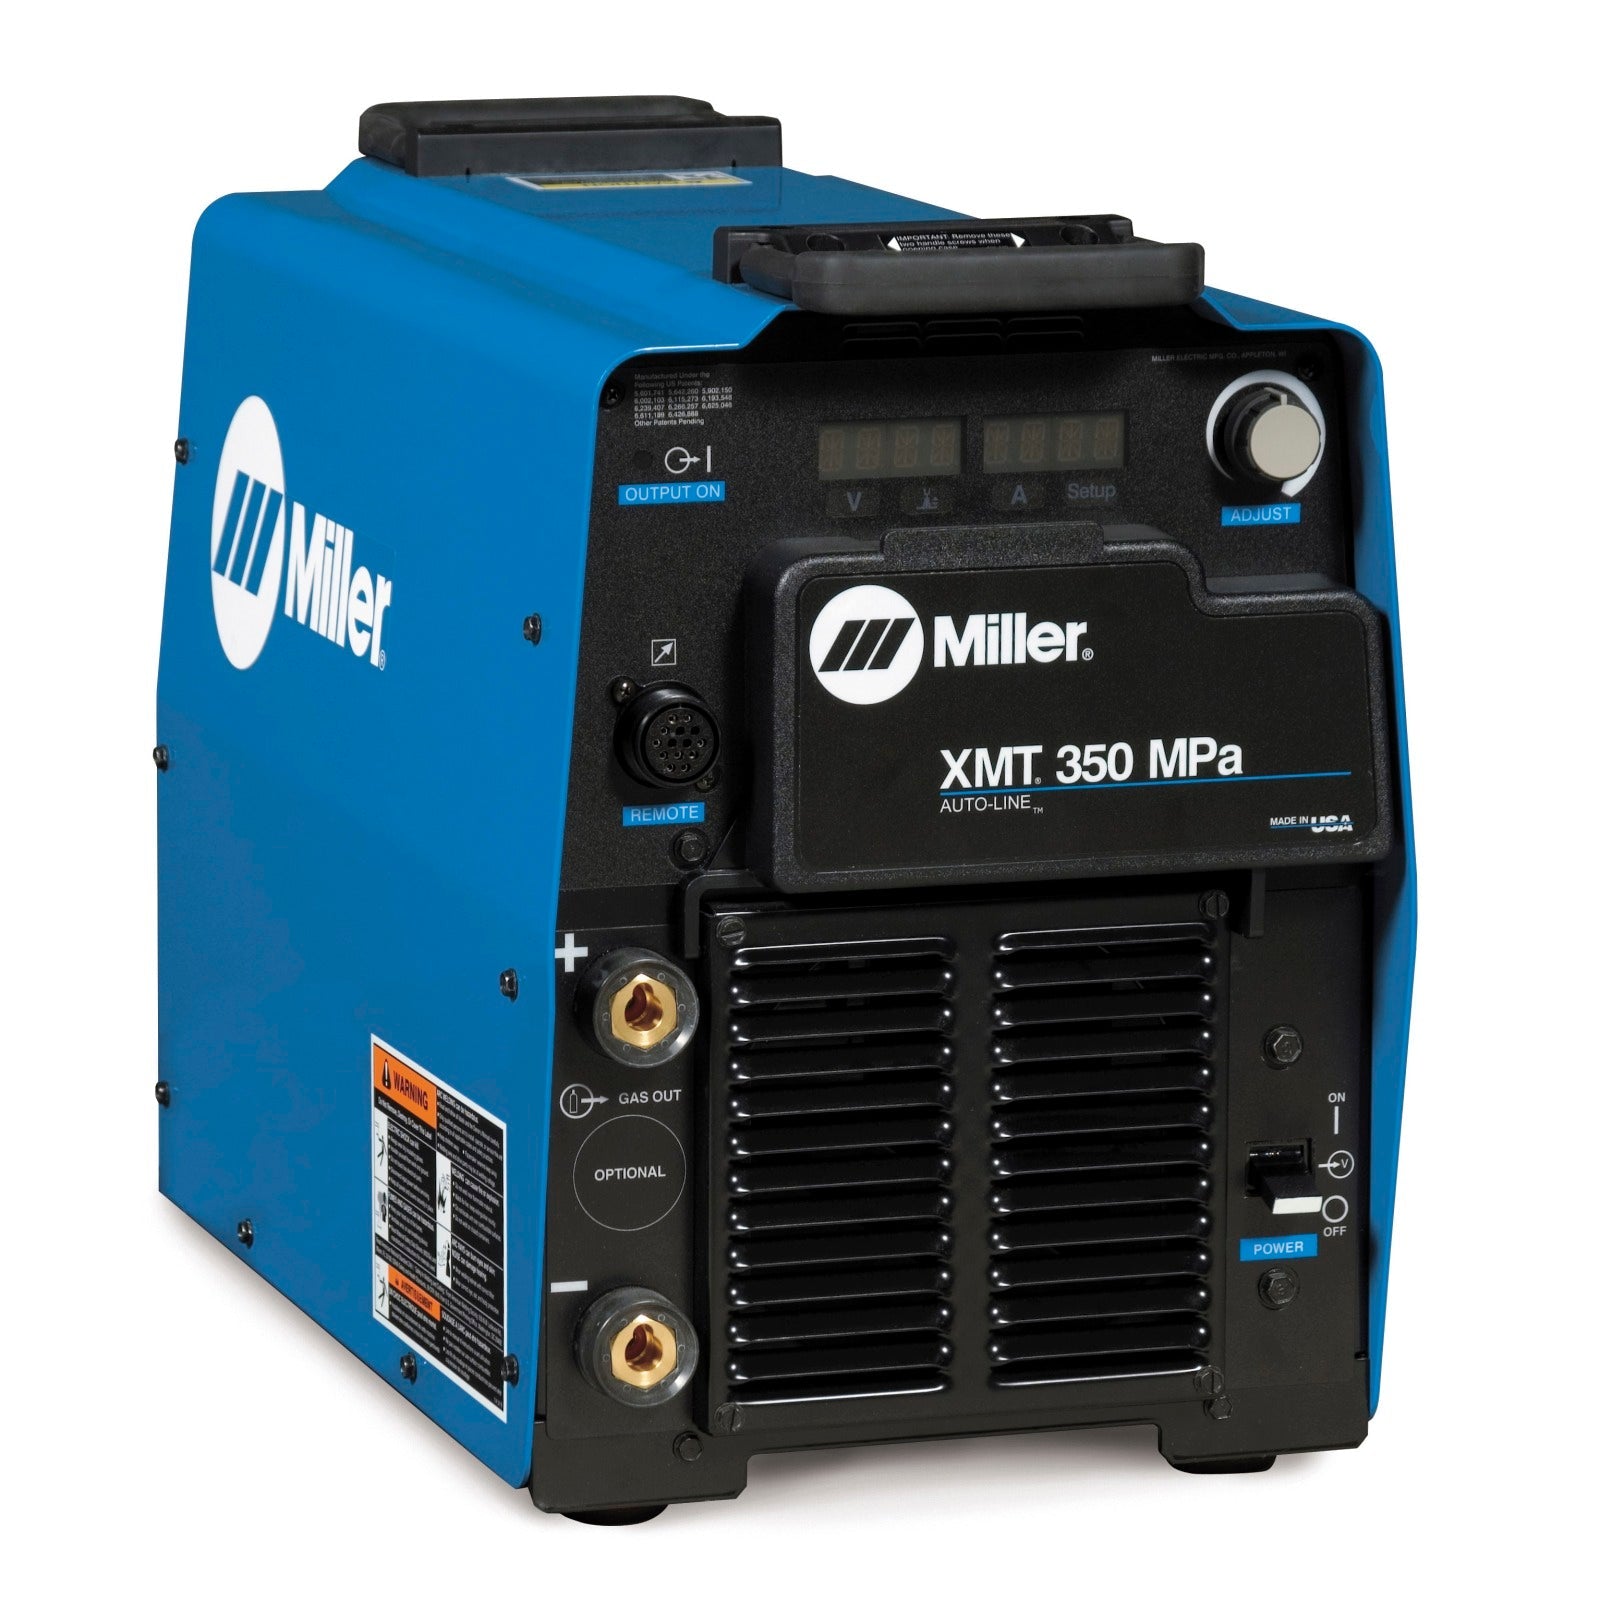 Miller XMT 350 MPa Multiprocess Welder with Tweco (907366014)